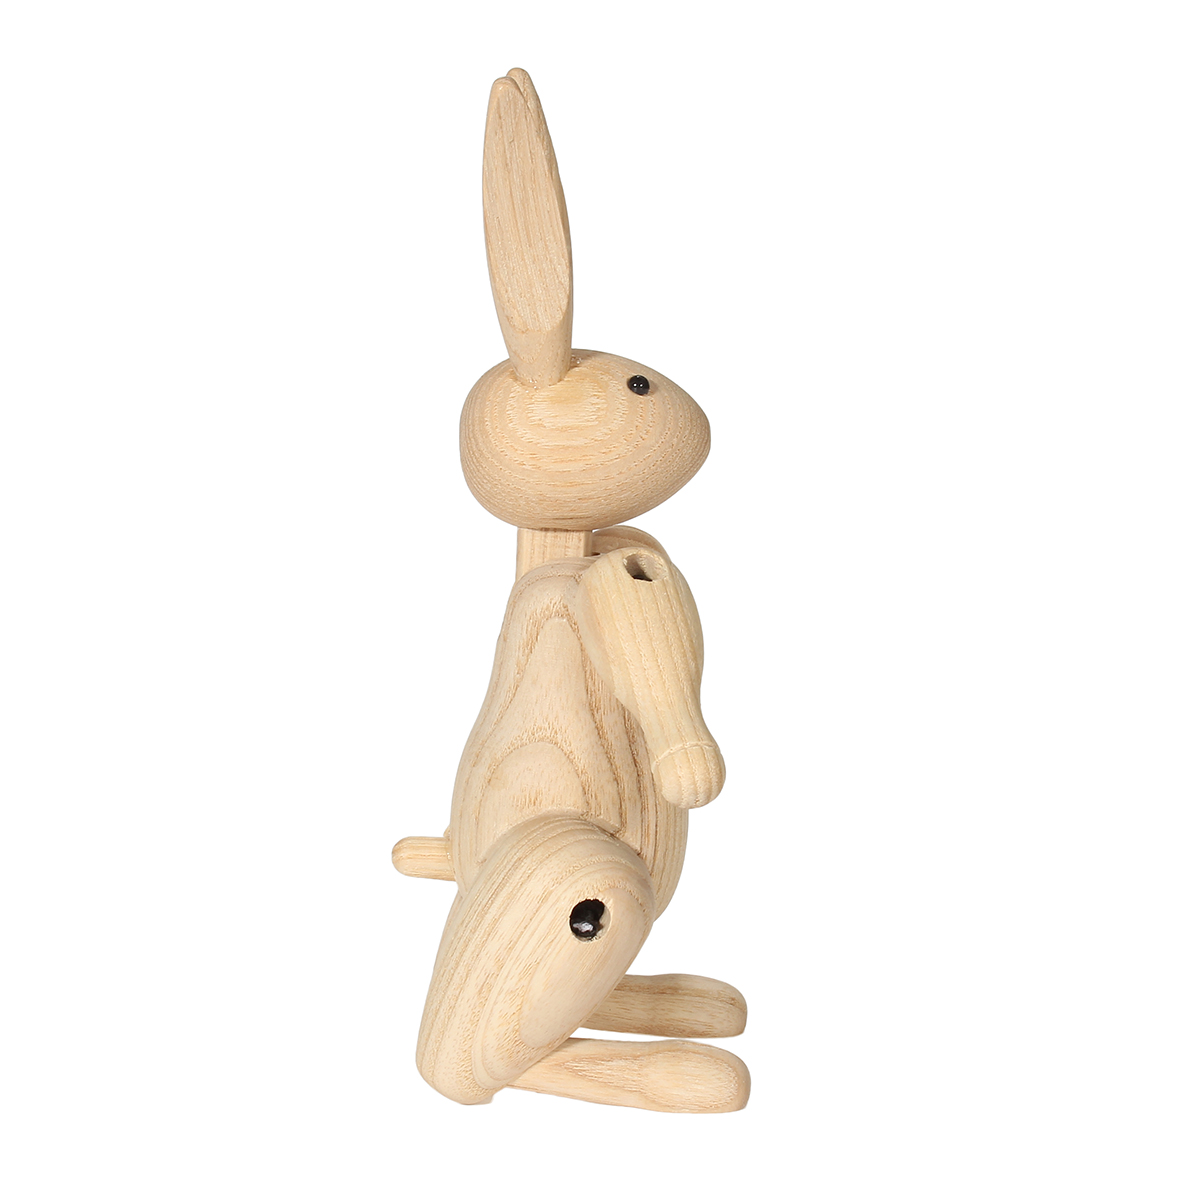 Wood-Carving-Miss-Rabbit-Figurines-Joints-Puppets-Animal-Art-Home-Decoration-Crafts-1241724-4